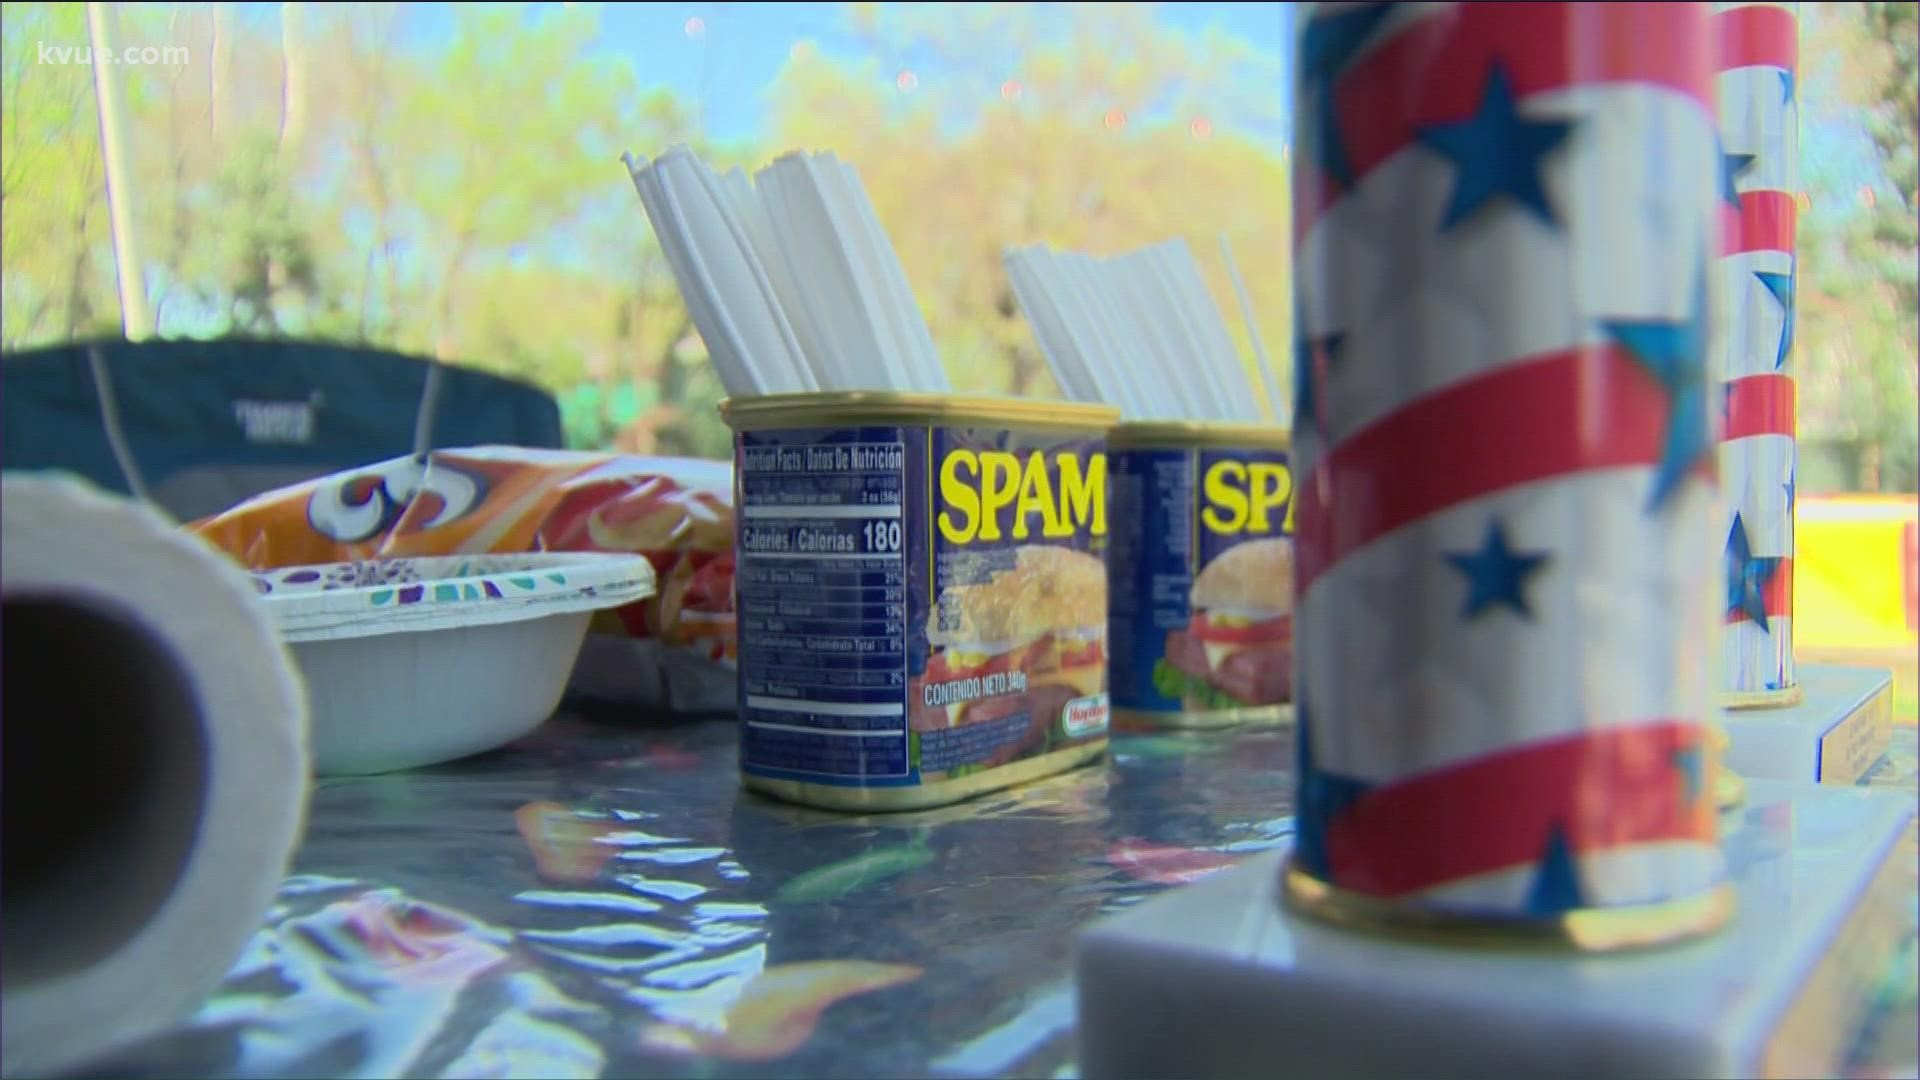 Spam fans from near and far gathered in Austin today to cook up the canned meat in a variety of ways and have a good time while doing it.